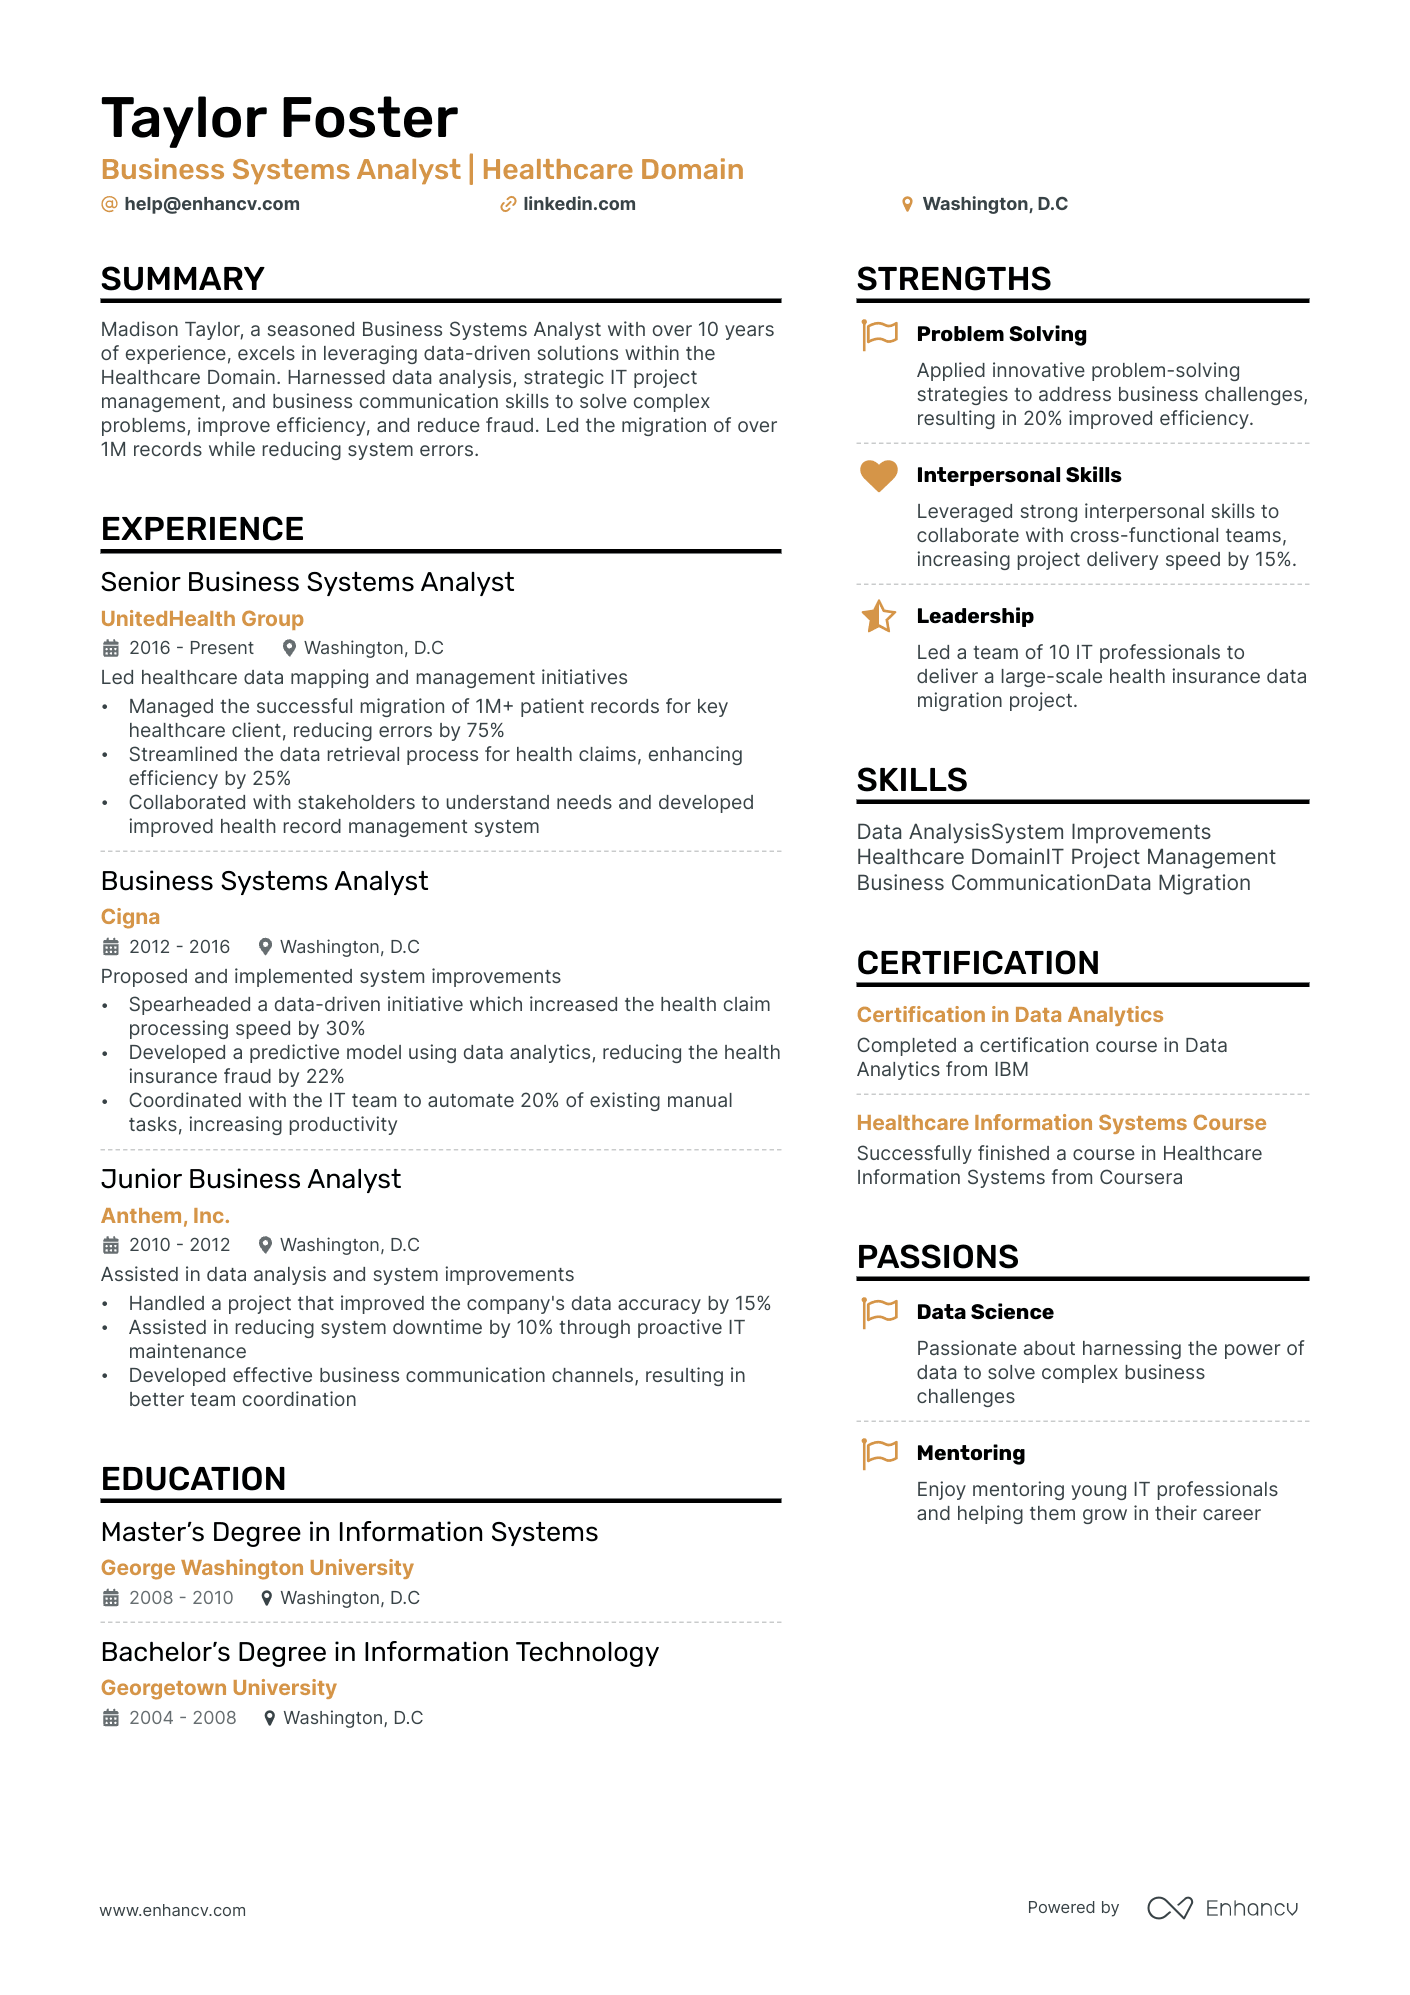 business system analyst resume example